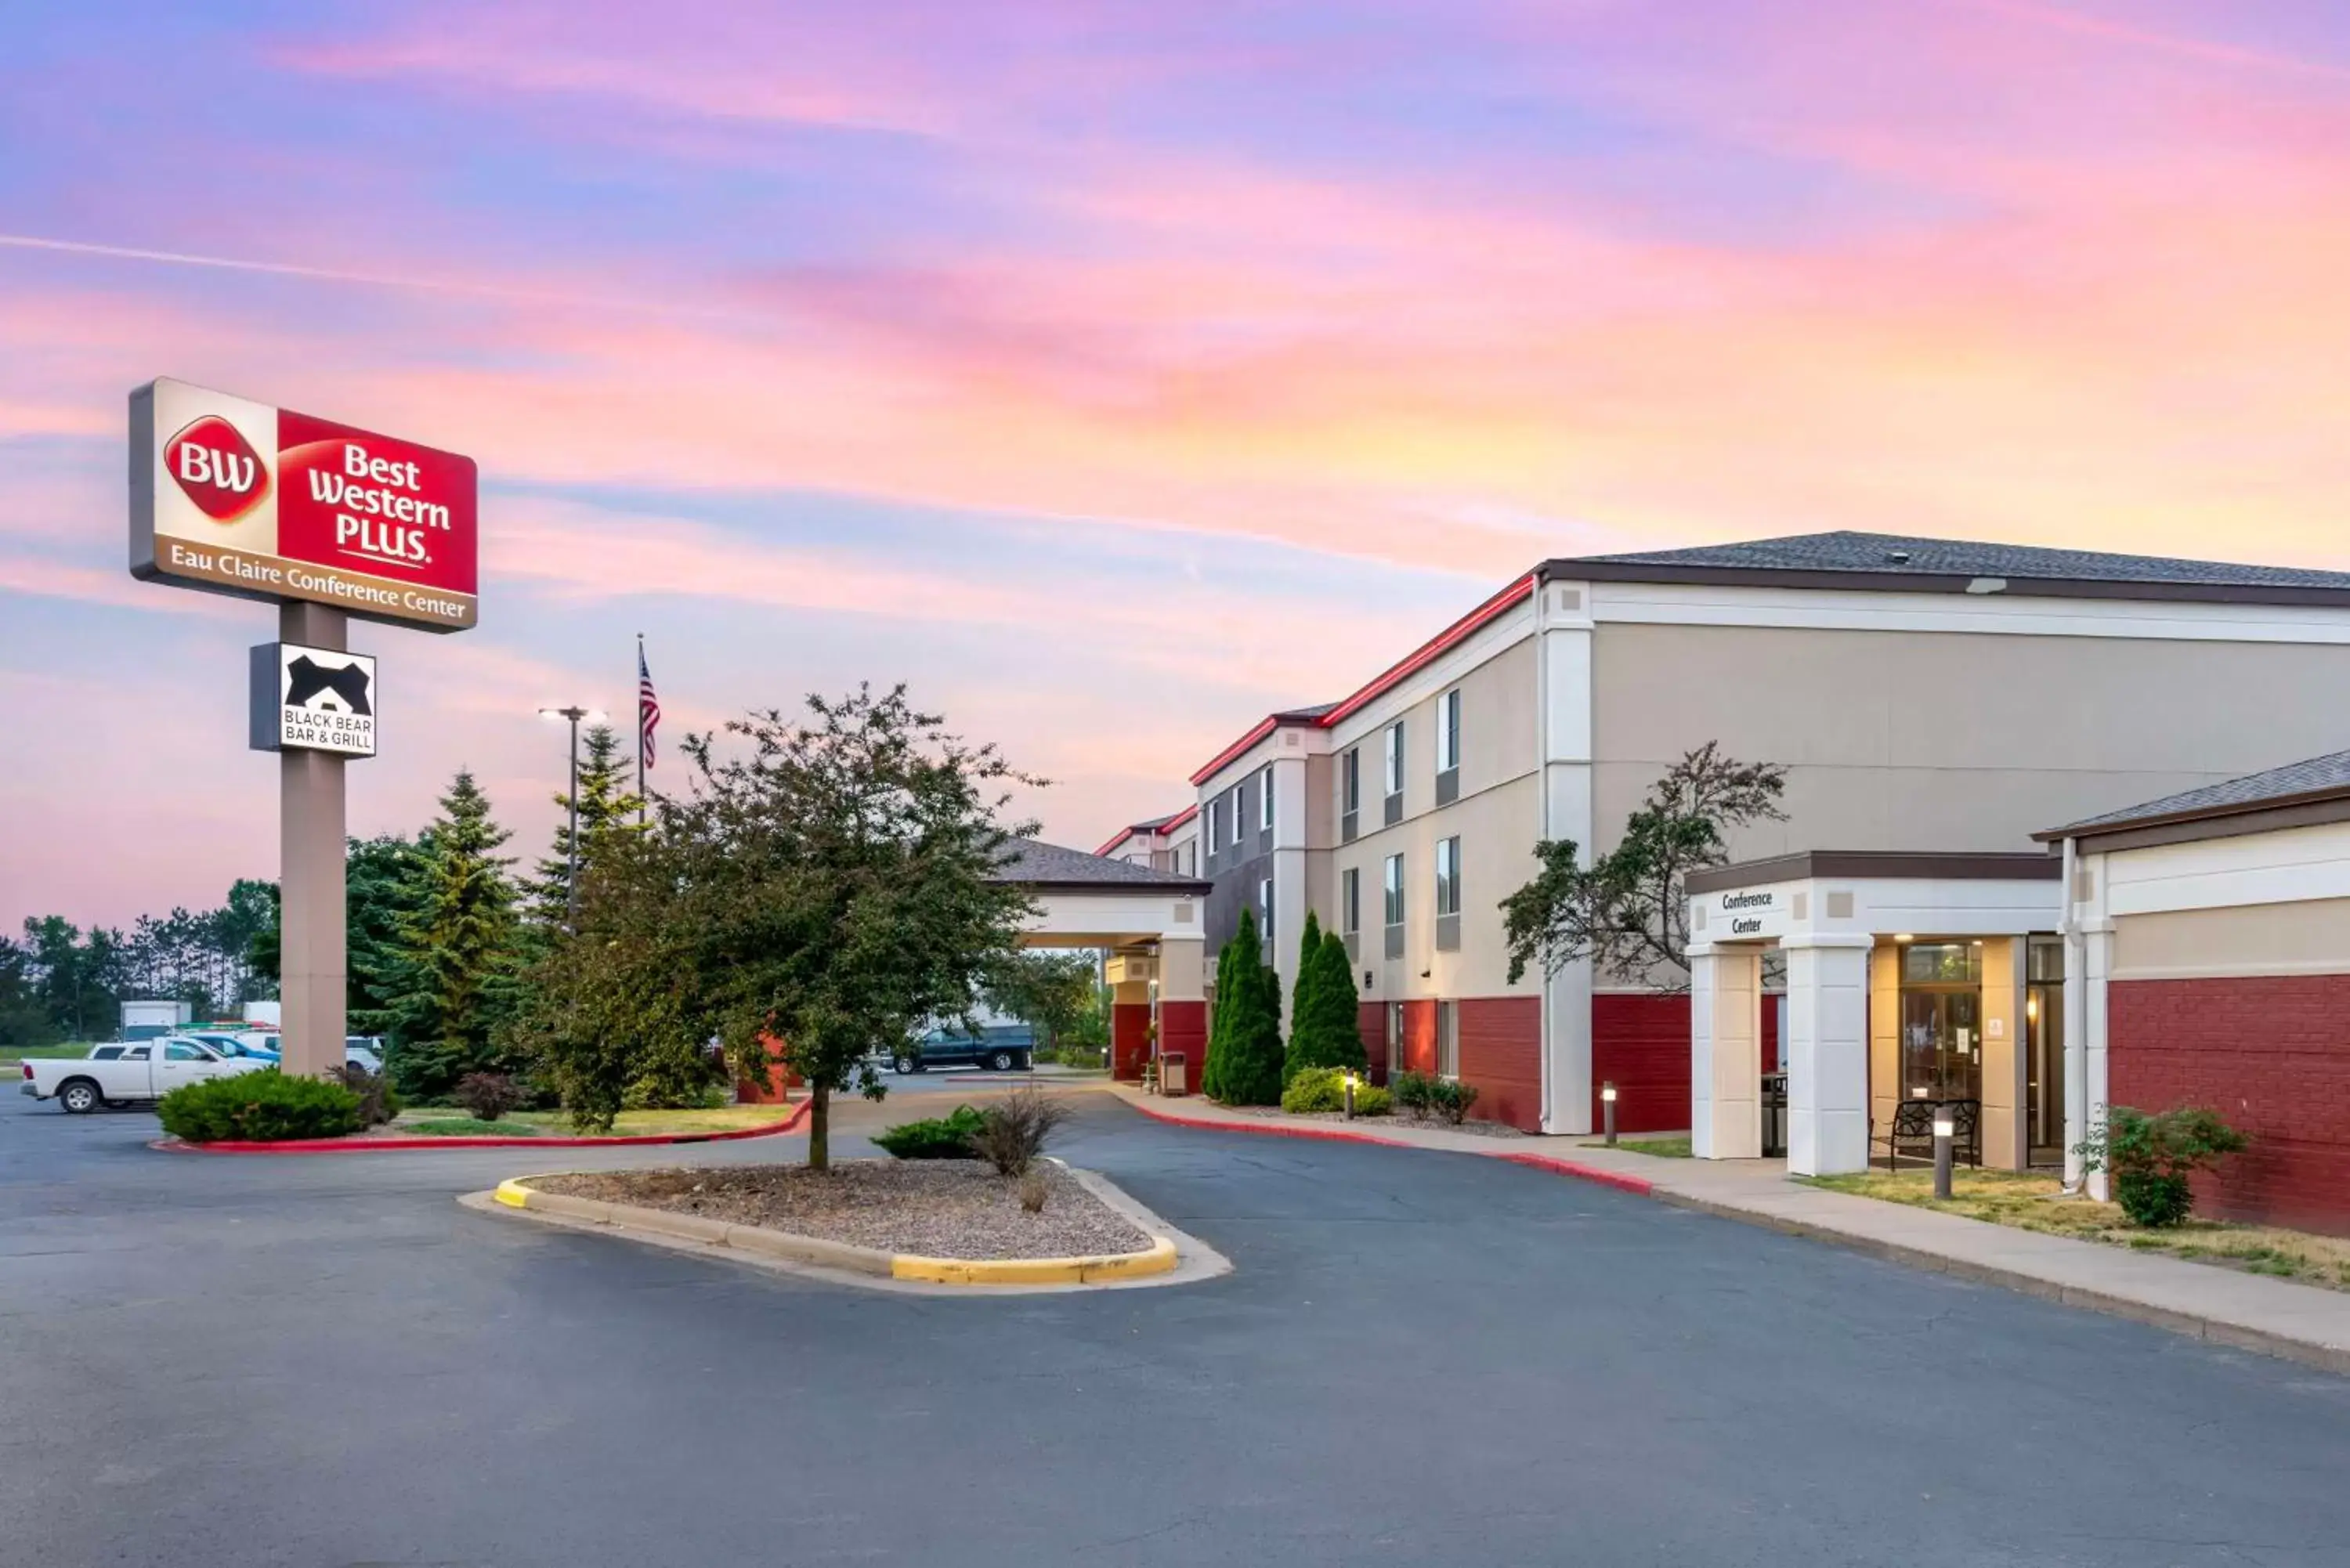 Property Building in Best Western Plus Eau Claire Conference Center